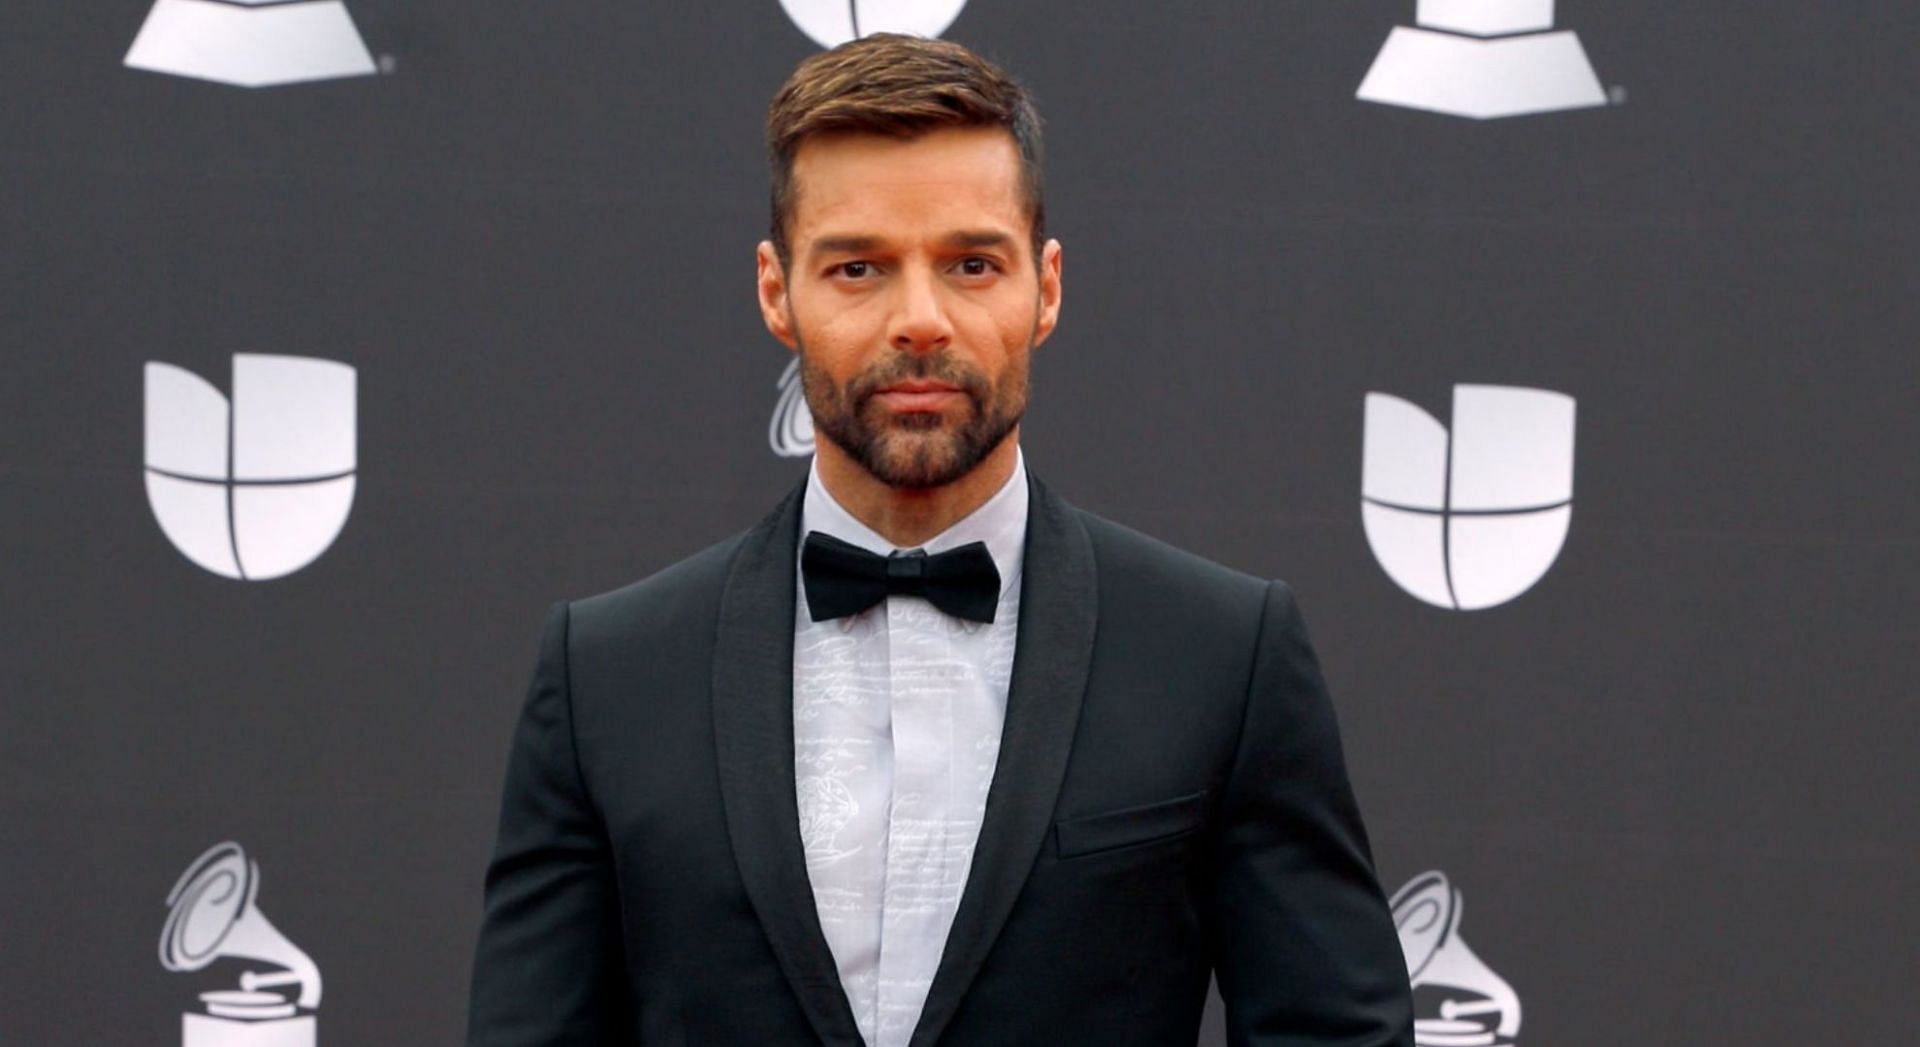 Ricky Martin has said abuse allegations made against him by his nephew are &quot;disgusting and untrue&quot; (Image via Getty Images)